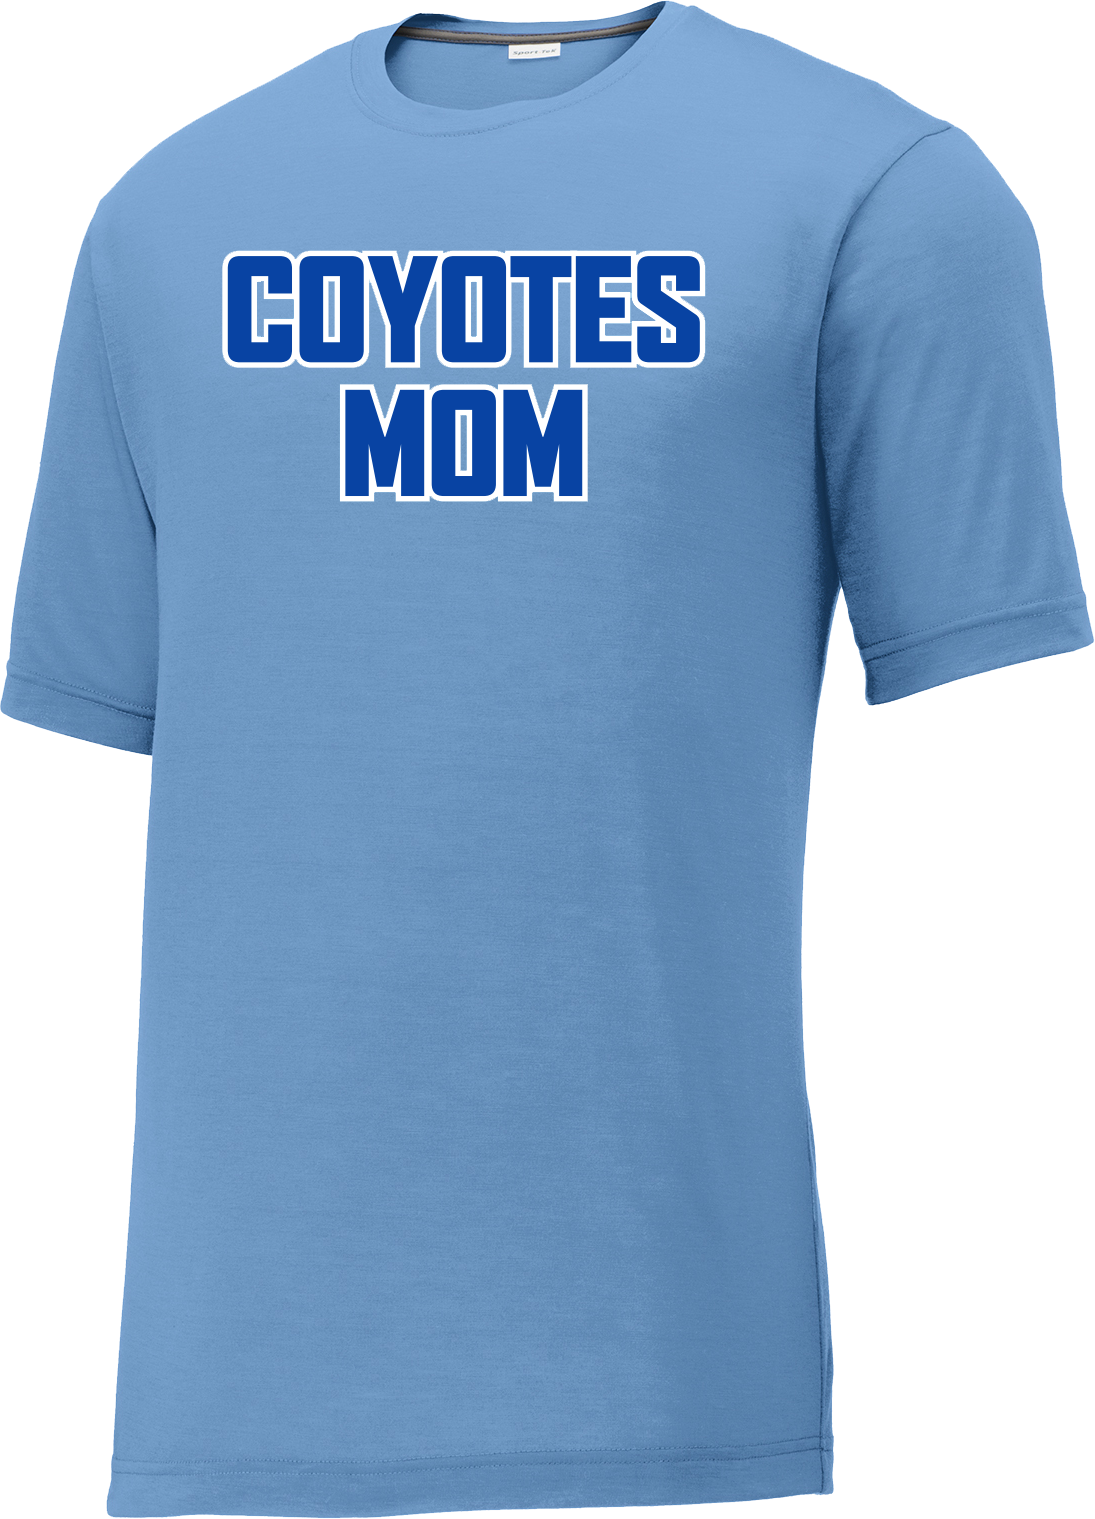 Coyotes Mom CottonTouch Performance T-Shirt